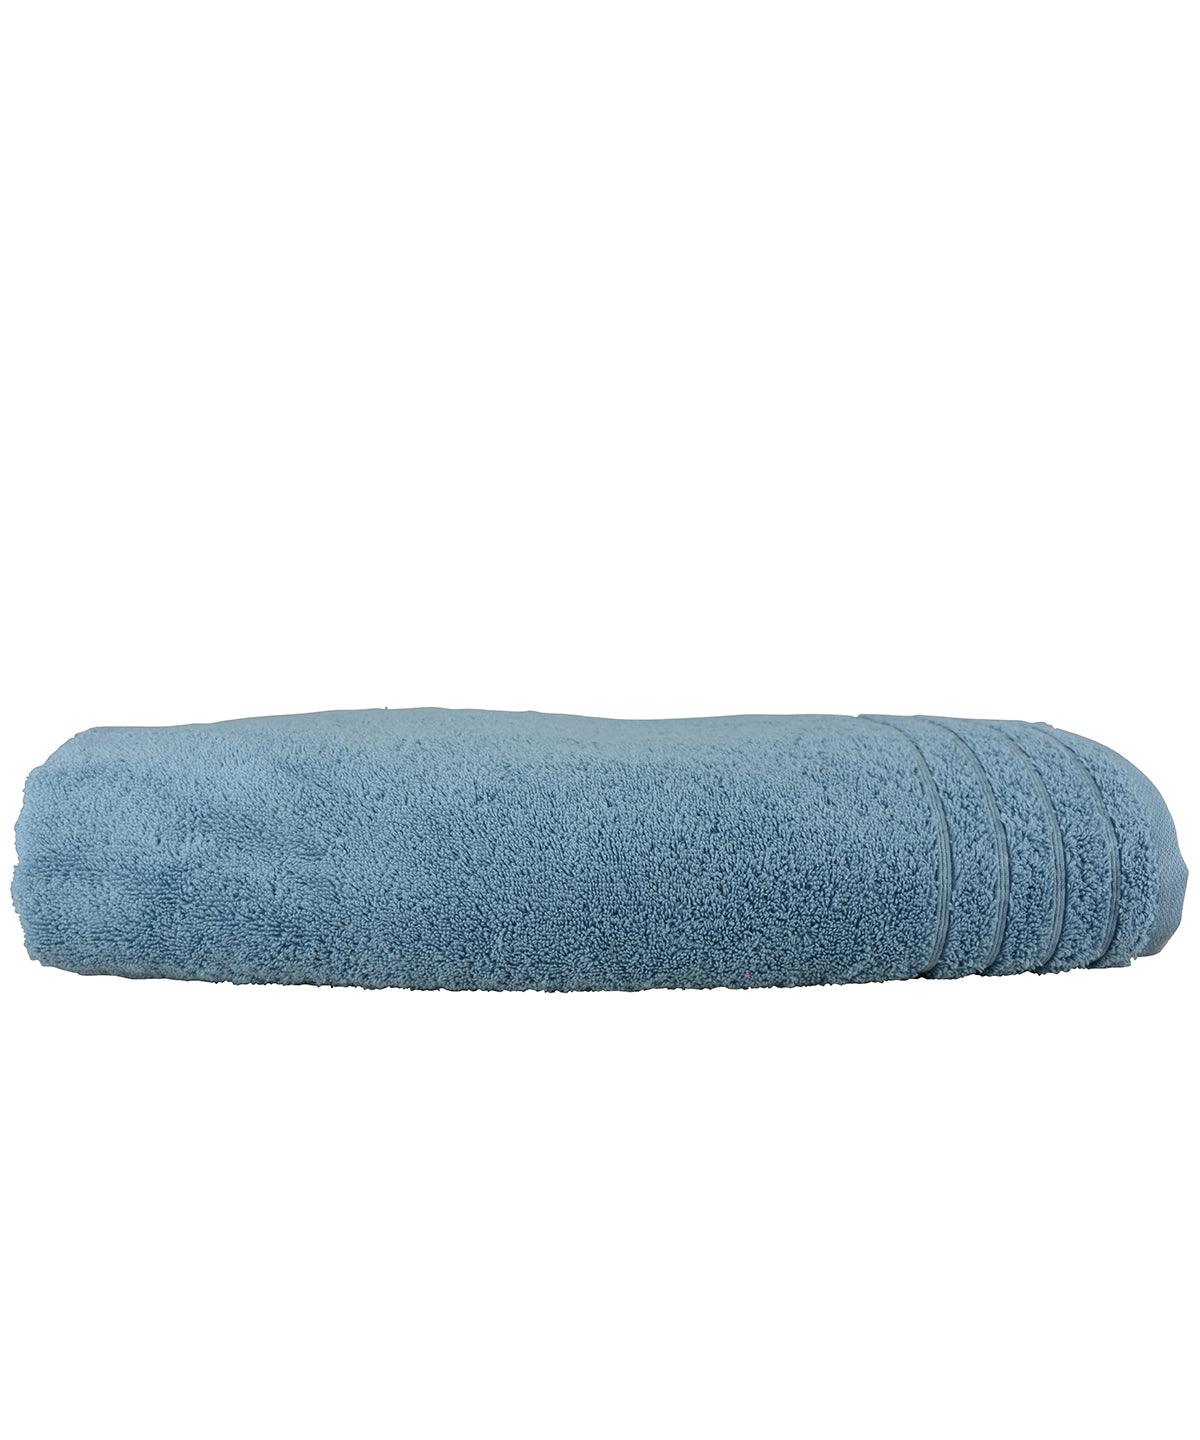 Blue - ARTG® Organic beach towel Towels A&R Towels Gifting & Accessories, Holiday Season, Homewares & Towelling, Must Haves, Organic & Conscious Schoolwear Centres